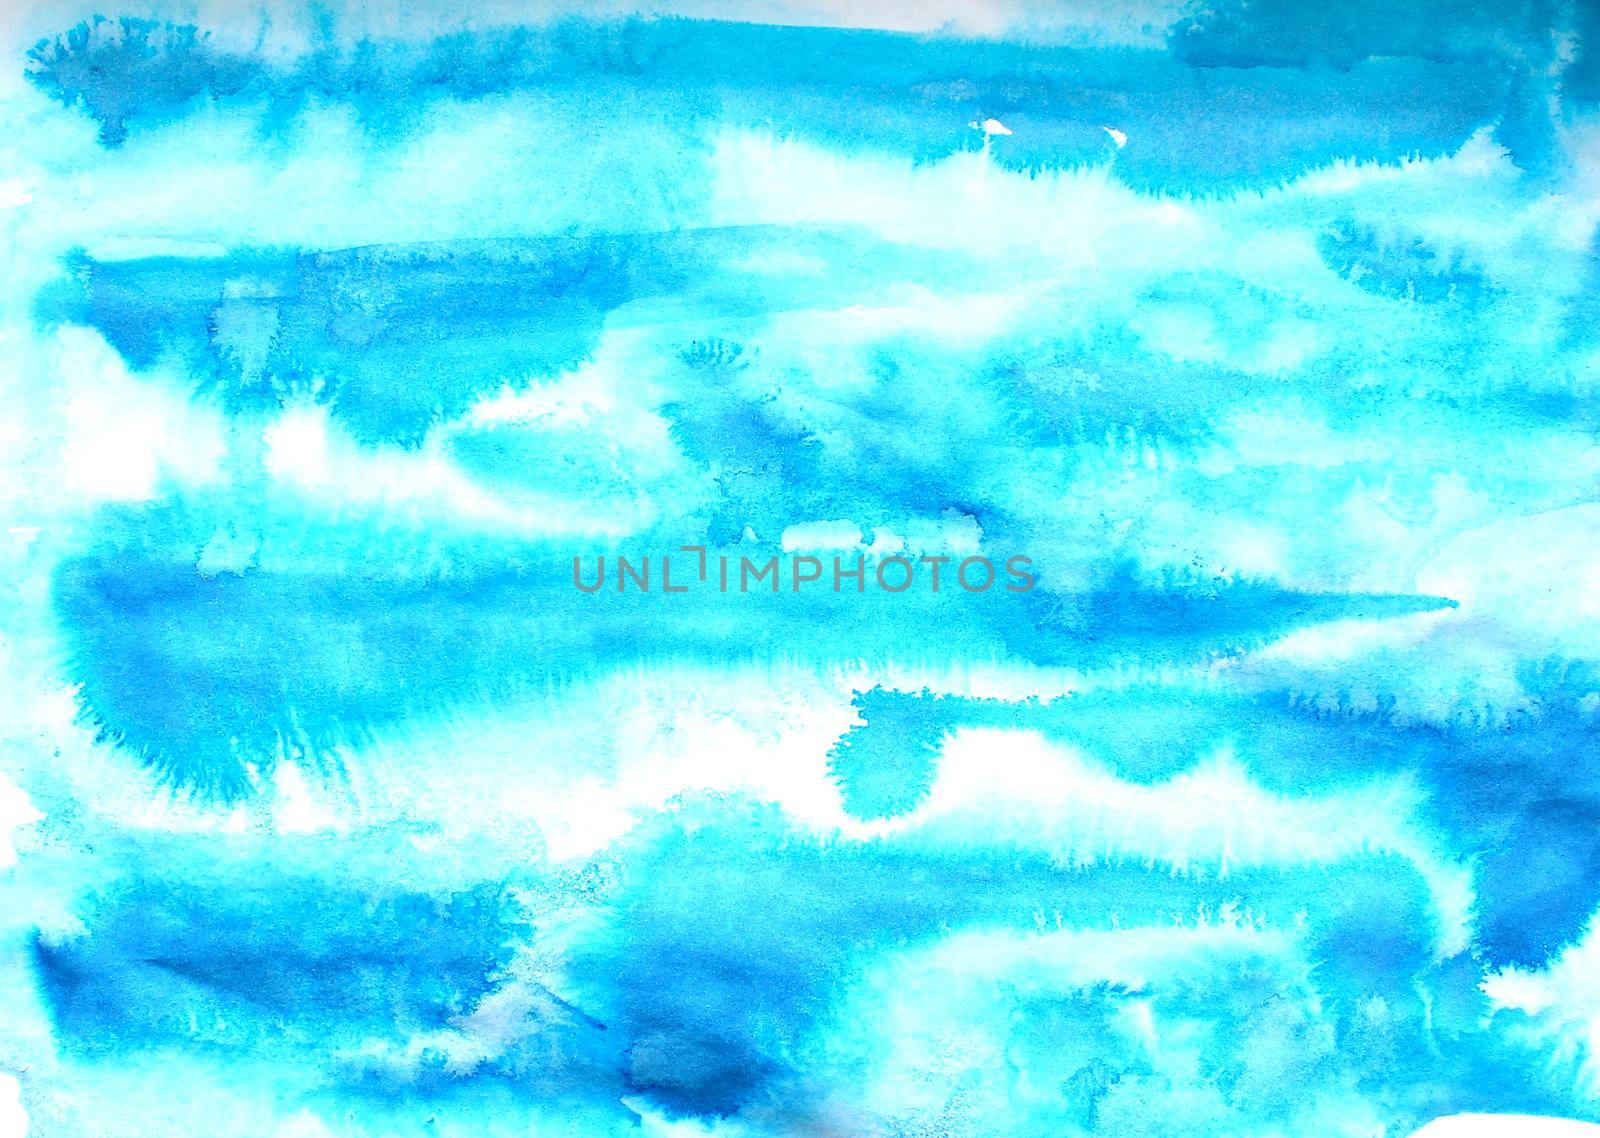 Abstract blue ink painting on grunge paper texture. Hand painted watercolor background. wash. Illustration stain and spot. Bright color. Unusual creativity art. by DesignAB